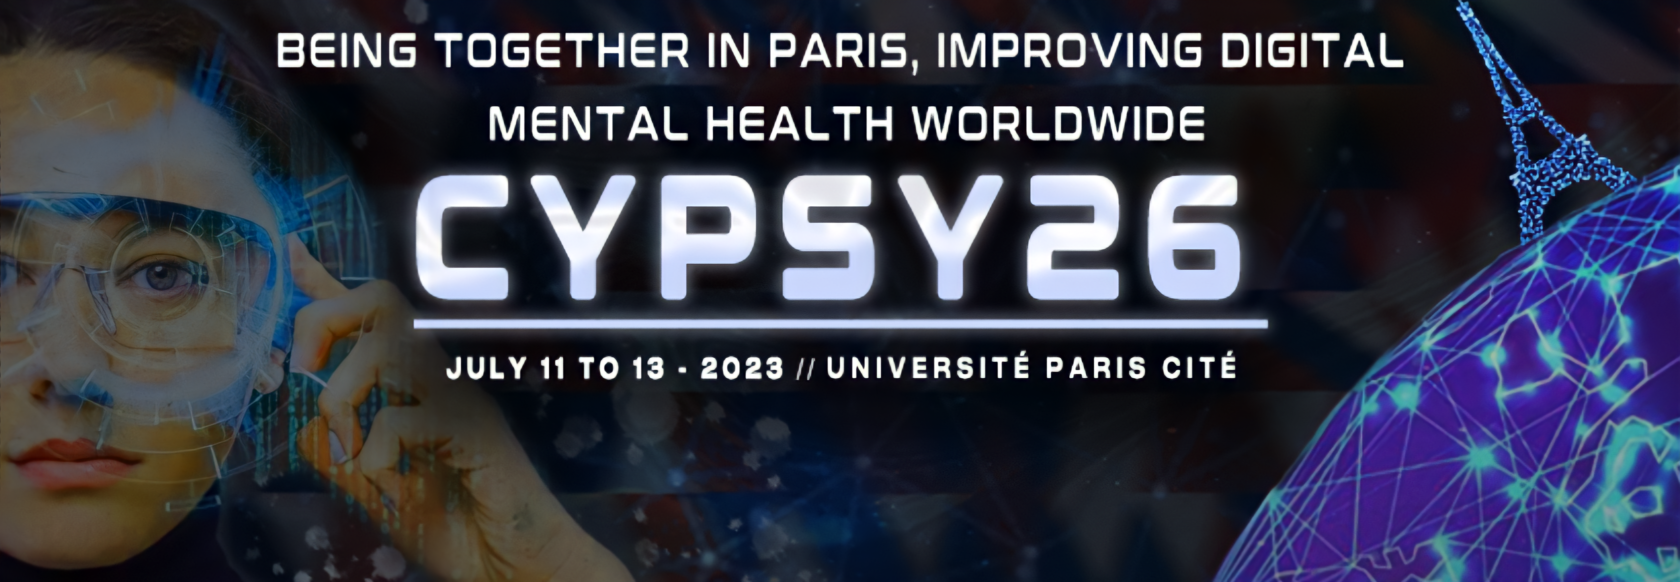 Event_Cypsy26